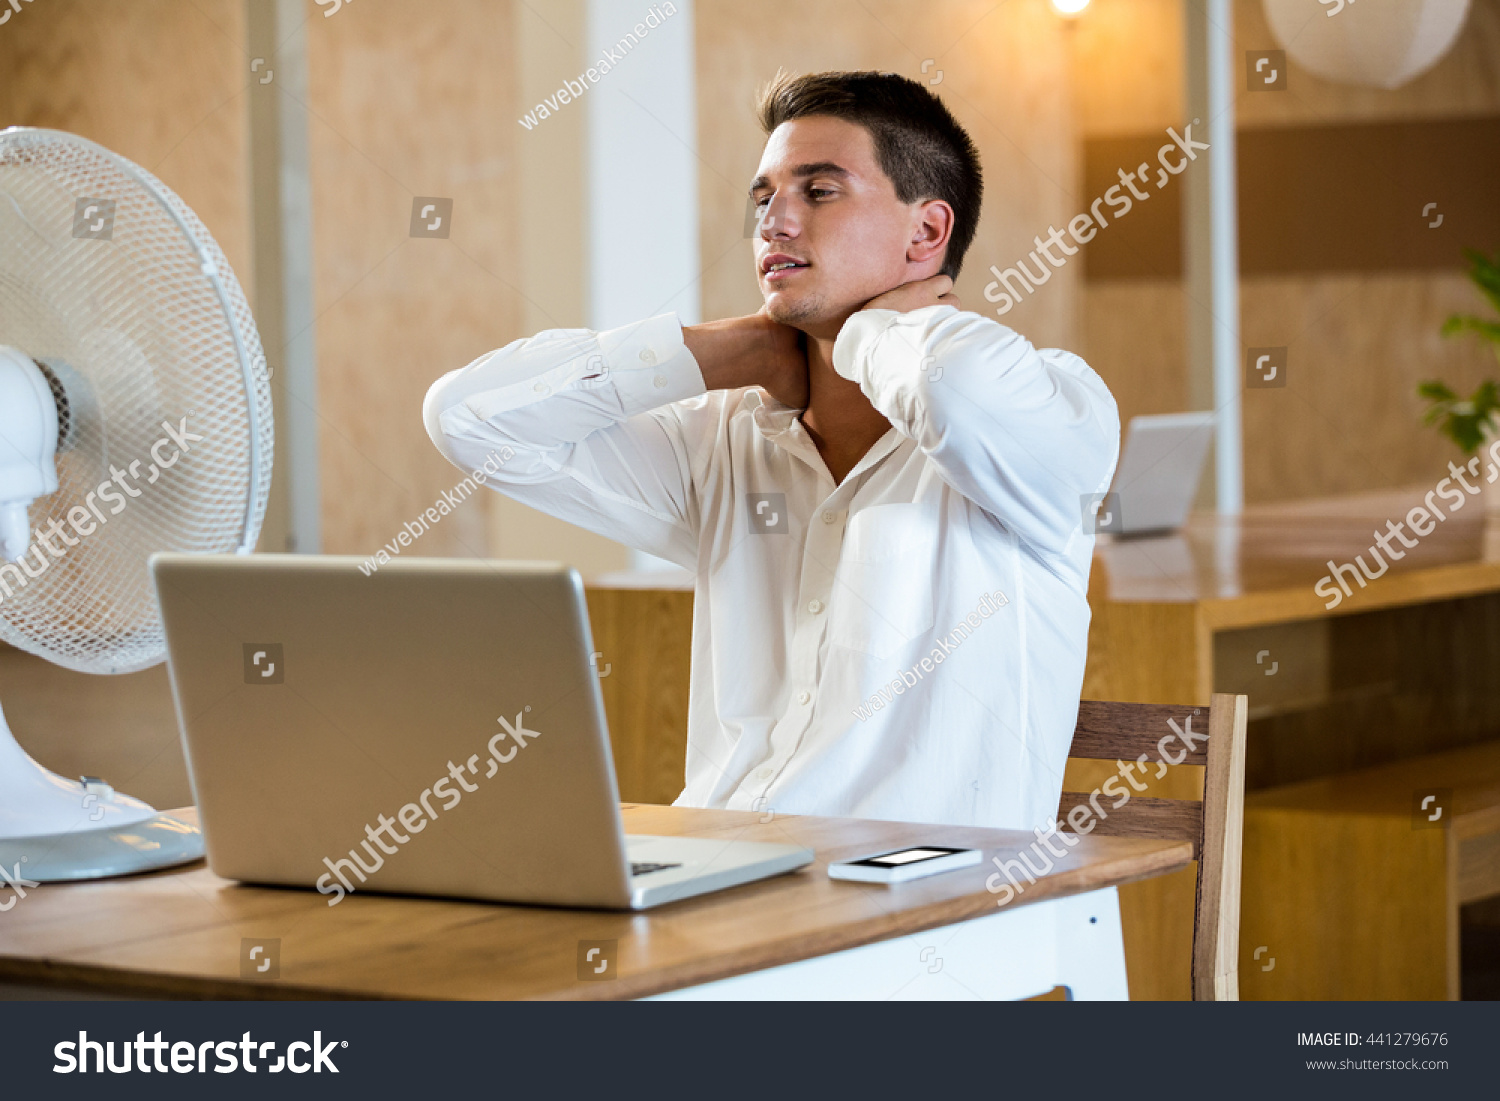 Man enjoying a breeze while using laptop in office #441279676